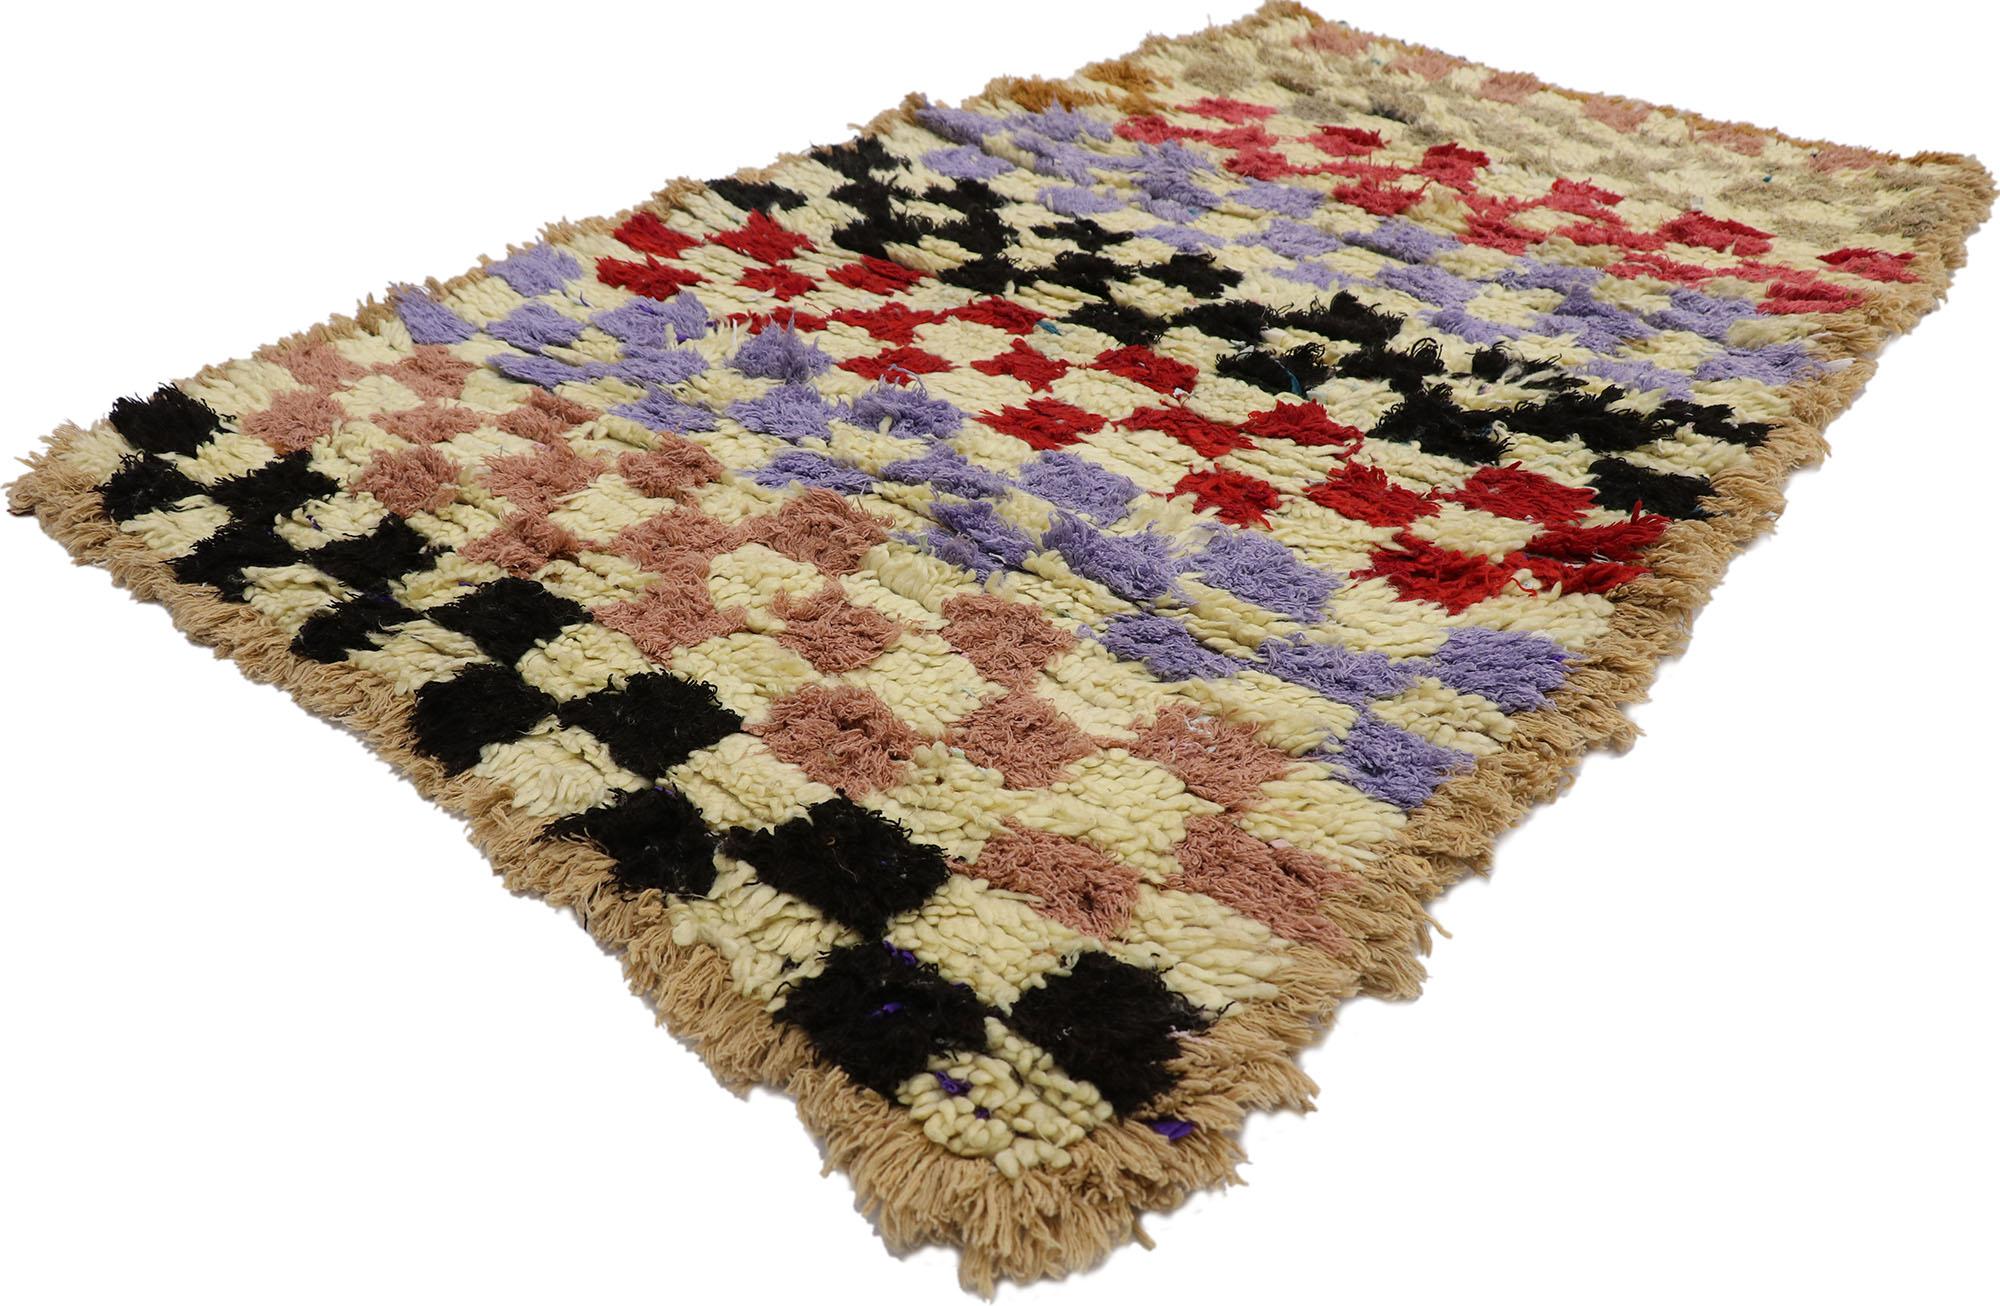 21571 vintage Berber Moroccan Azilal rug with Modern Cubist style 03'03 x 05'03. Showcasing a bold expressive design, incredible detail and texture, this hand knotted cotton and wool vintage Berber Moroccan Azilal rug is a captivating vision of